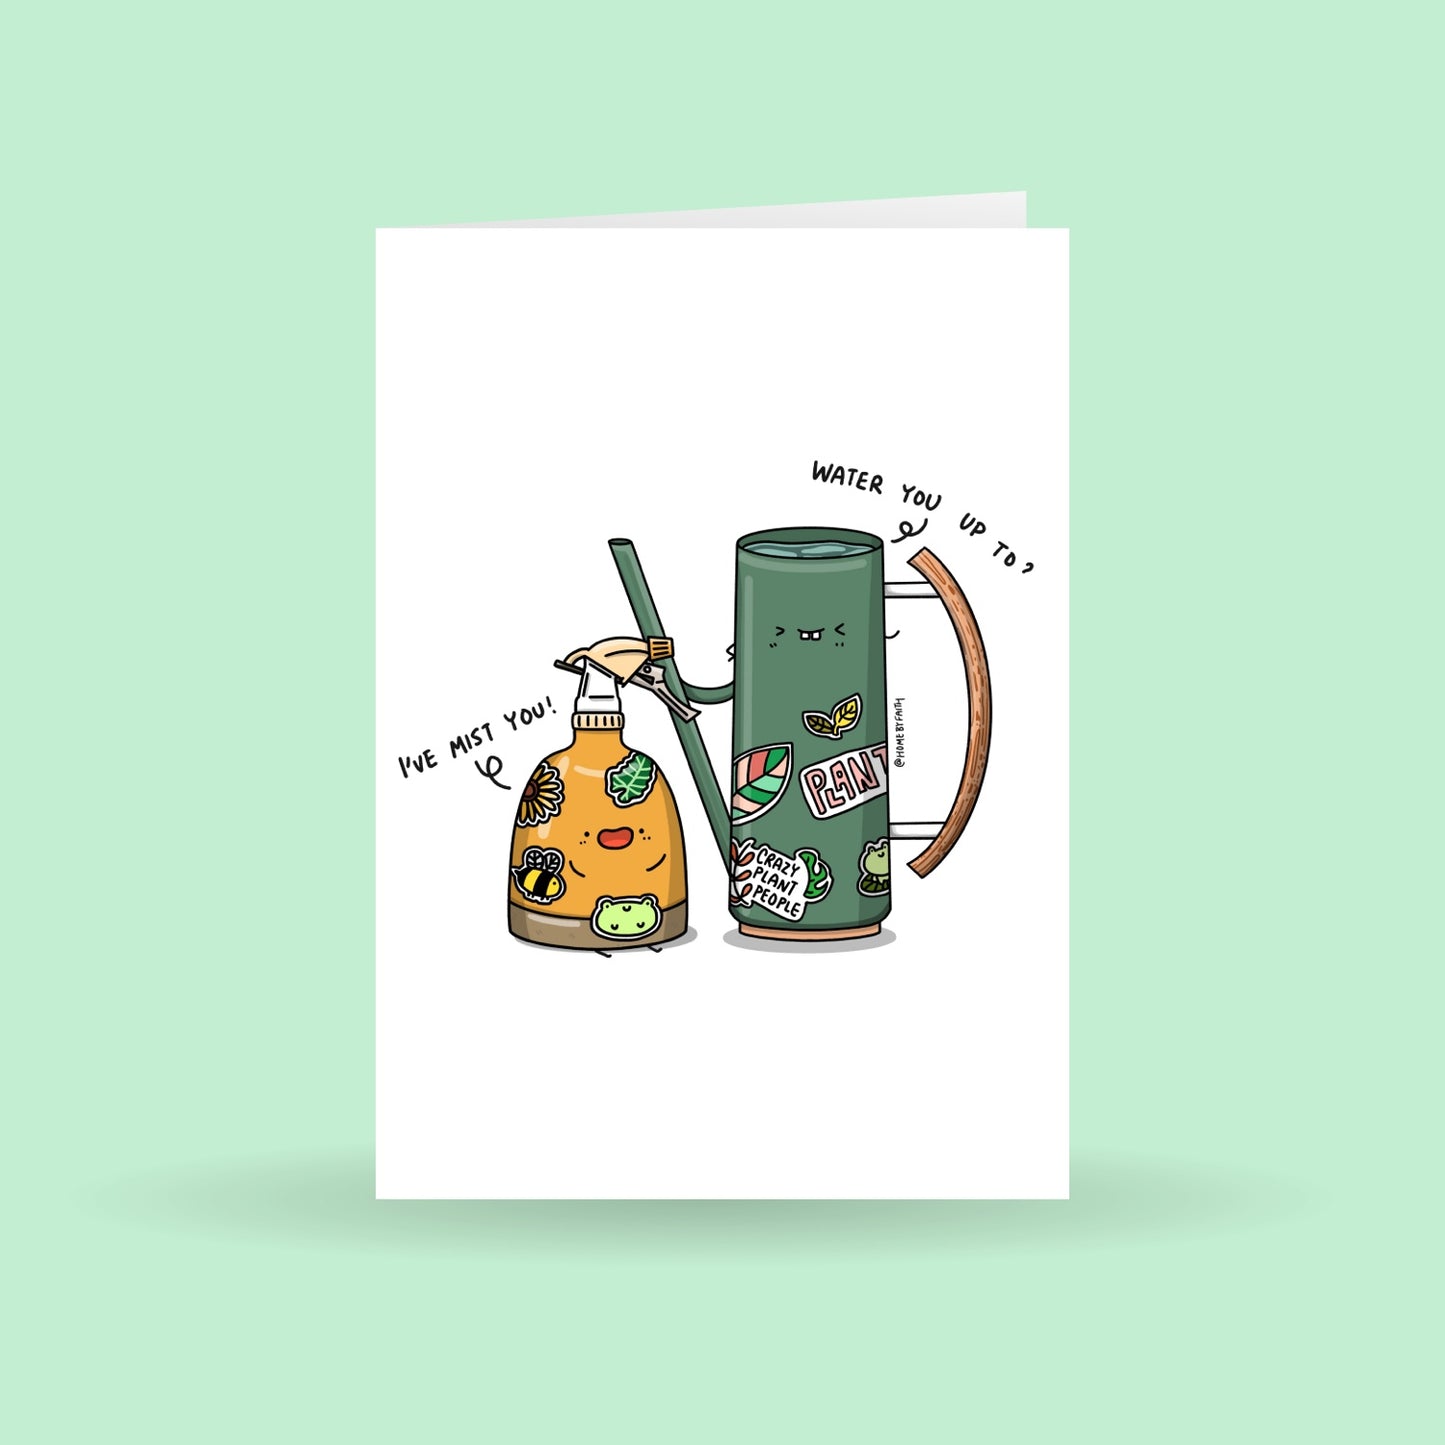 Water you up to, I've mist you, Plant Greeting Card